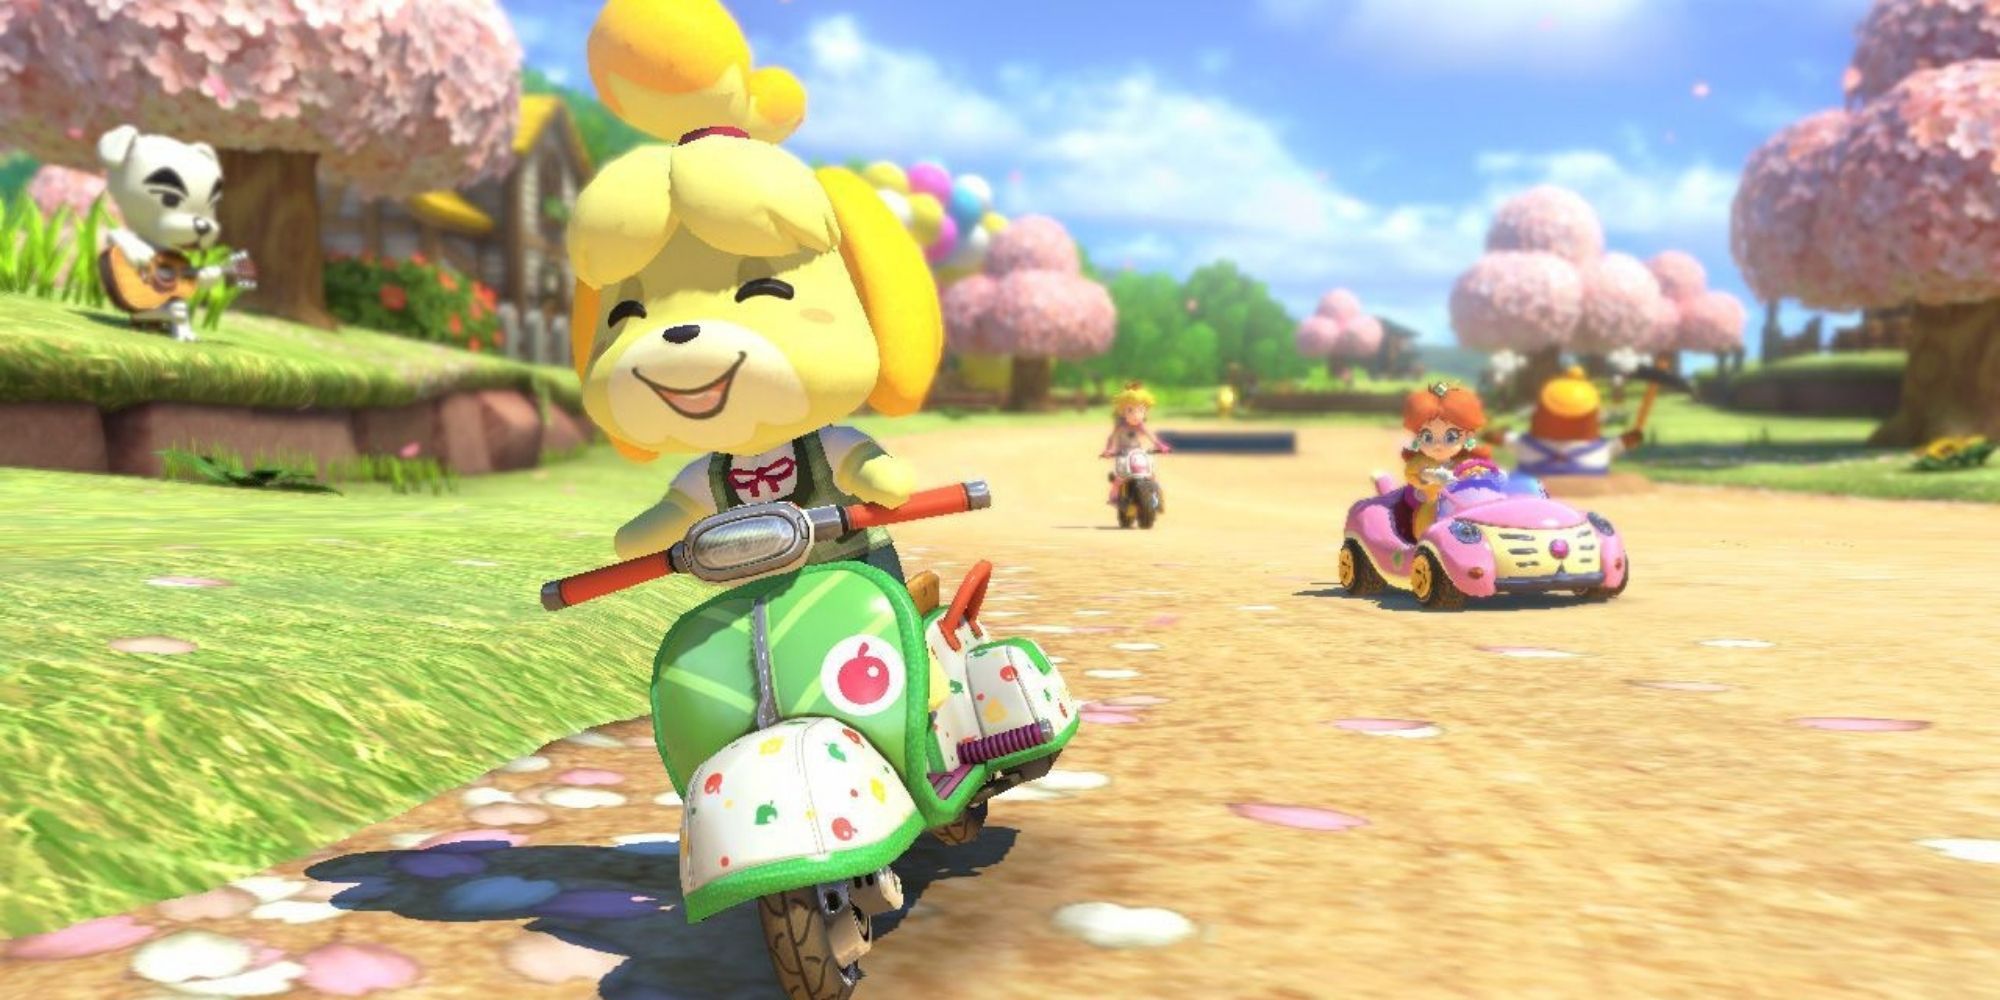 Isabelle rides a scooter on the Animal Crossing track